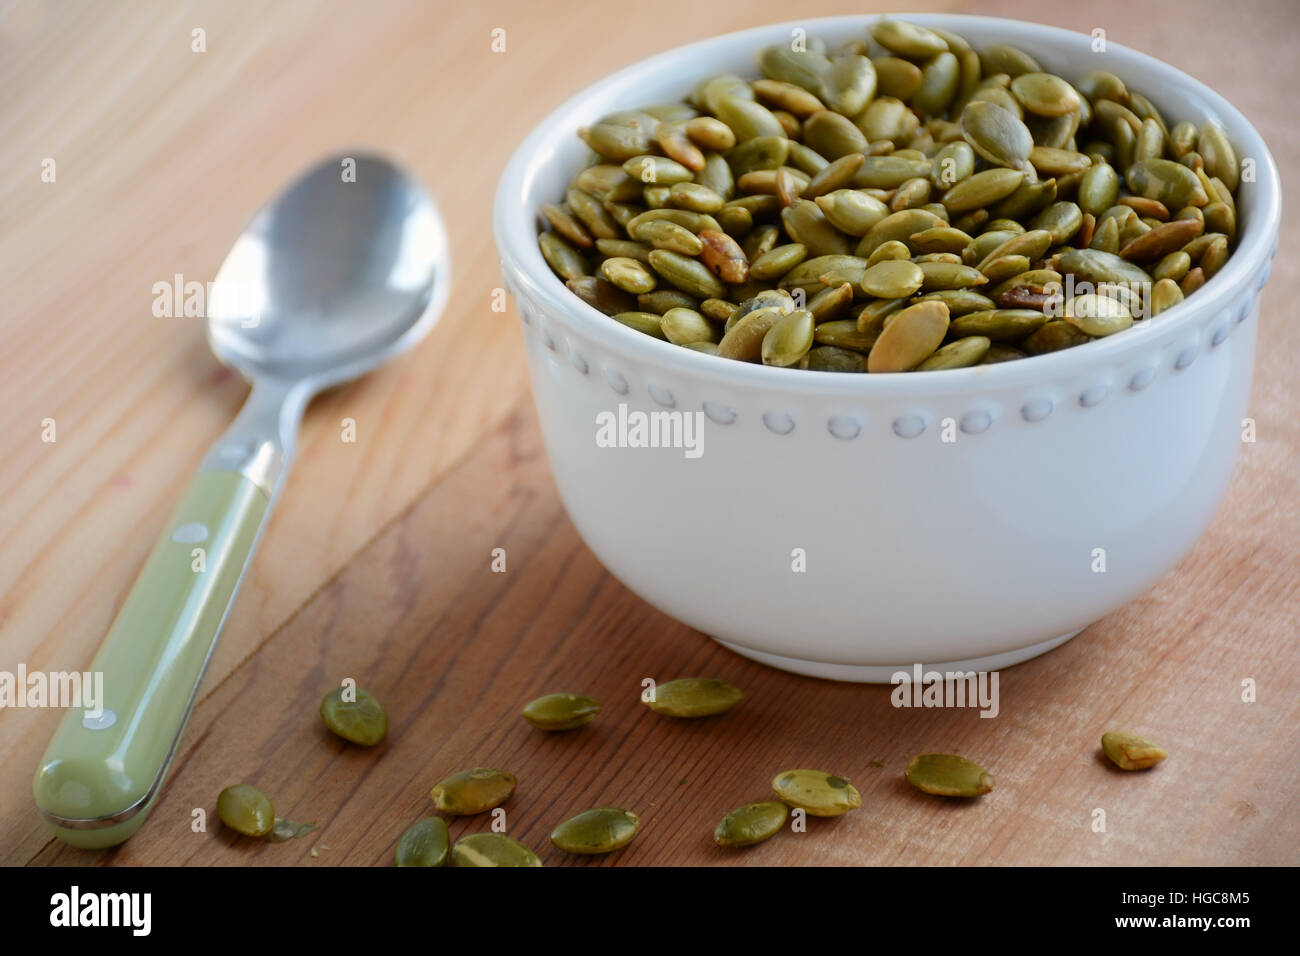 Roasted pumpkin seeds in white decorative bowl with green spoon on cedar background.  Horizontal format with shallow depth of field. Stock Photo